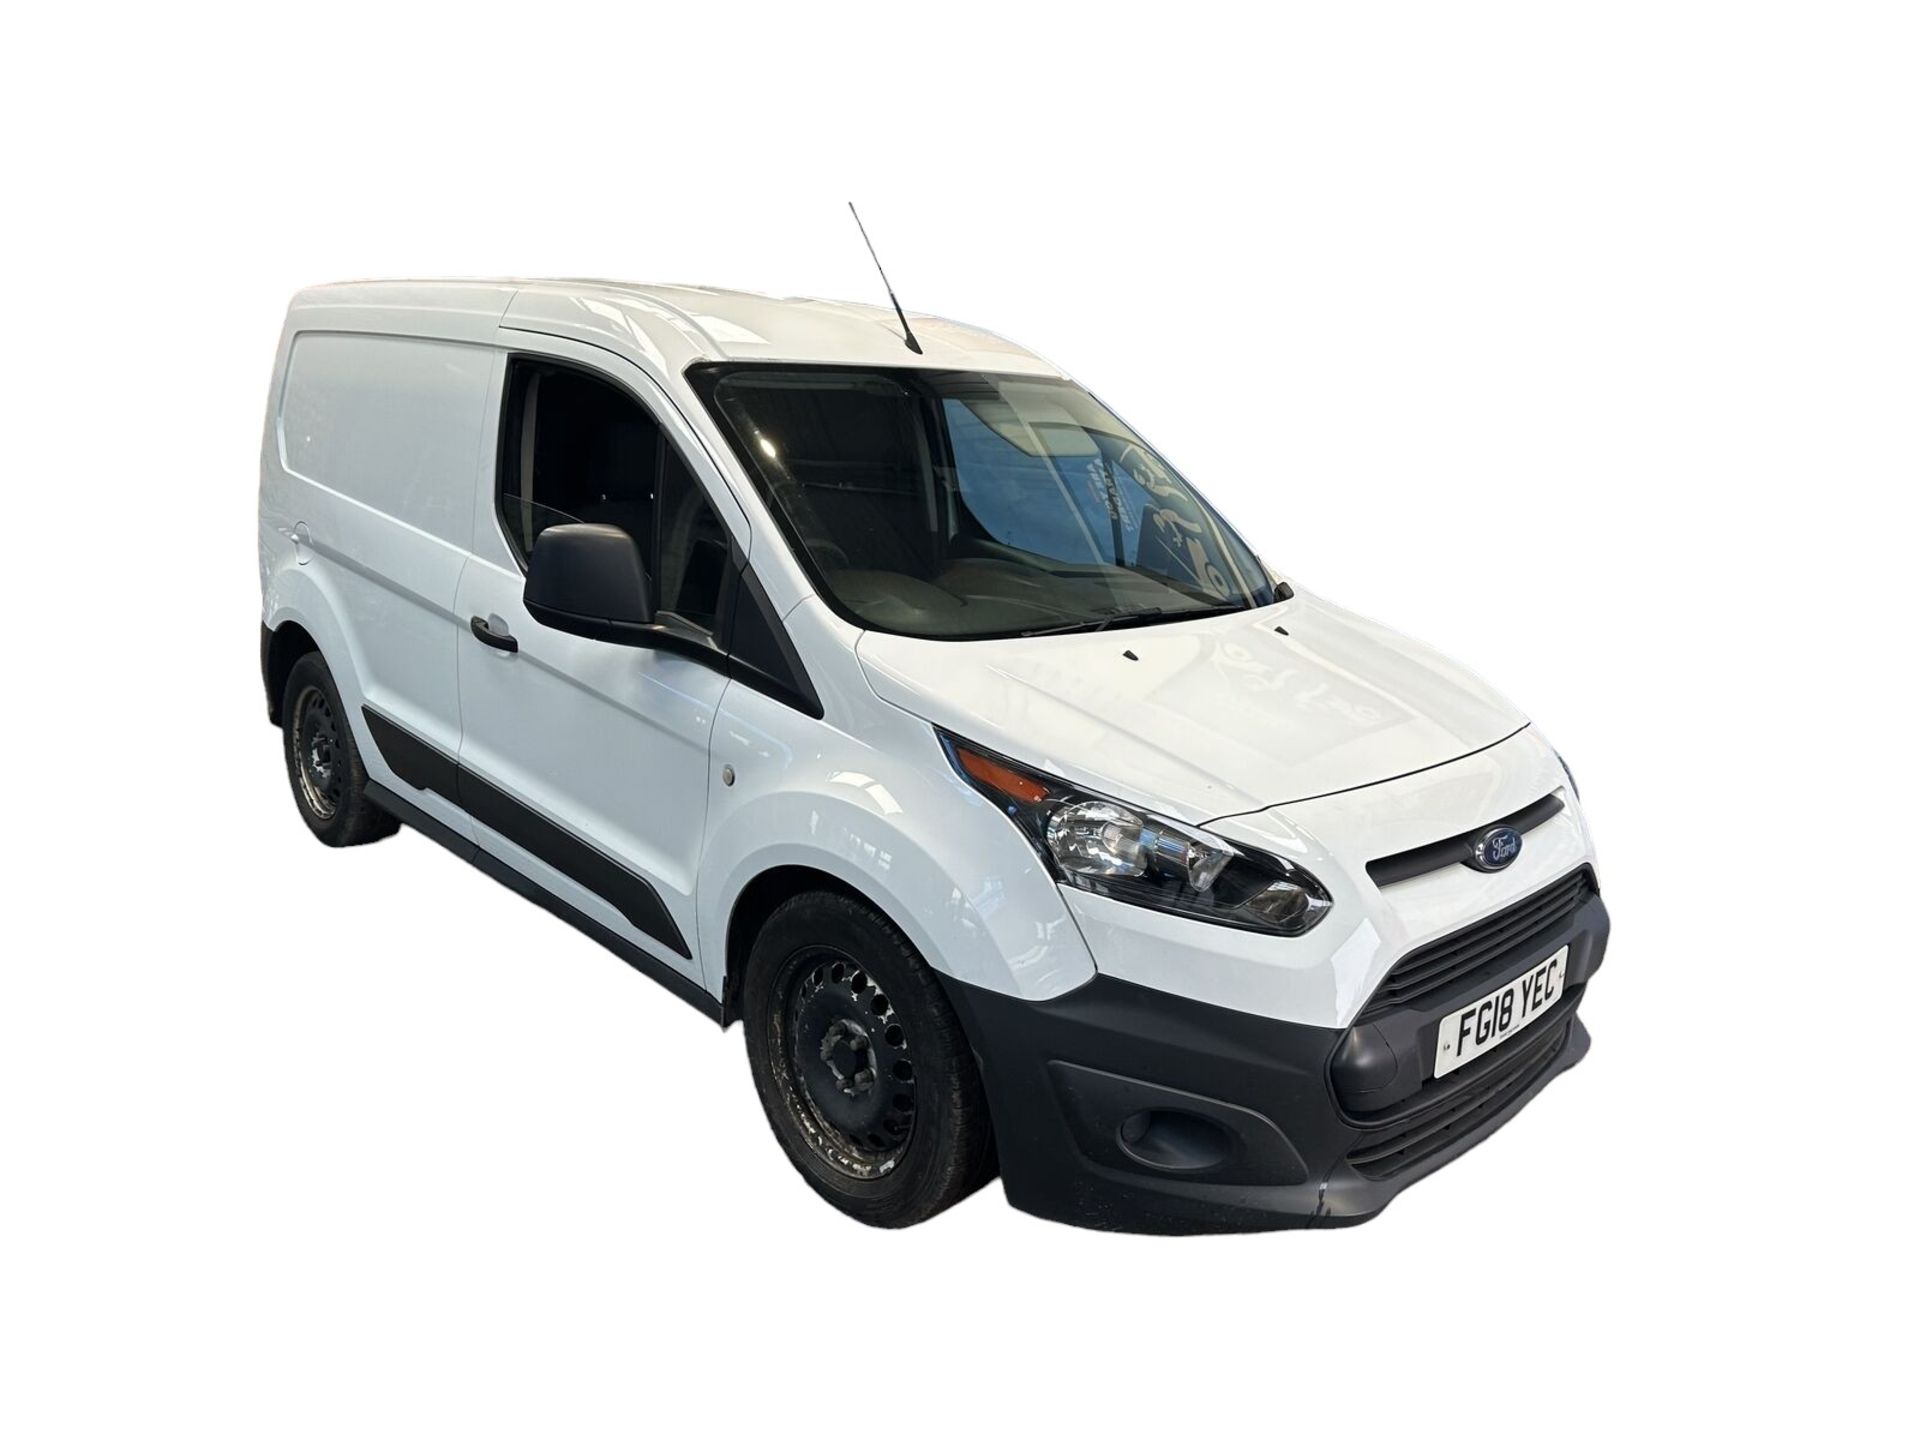 TRUSTY TRANSIT: LOW MILEAGE 2018 CONNECT, WORK-READY